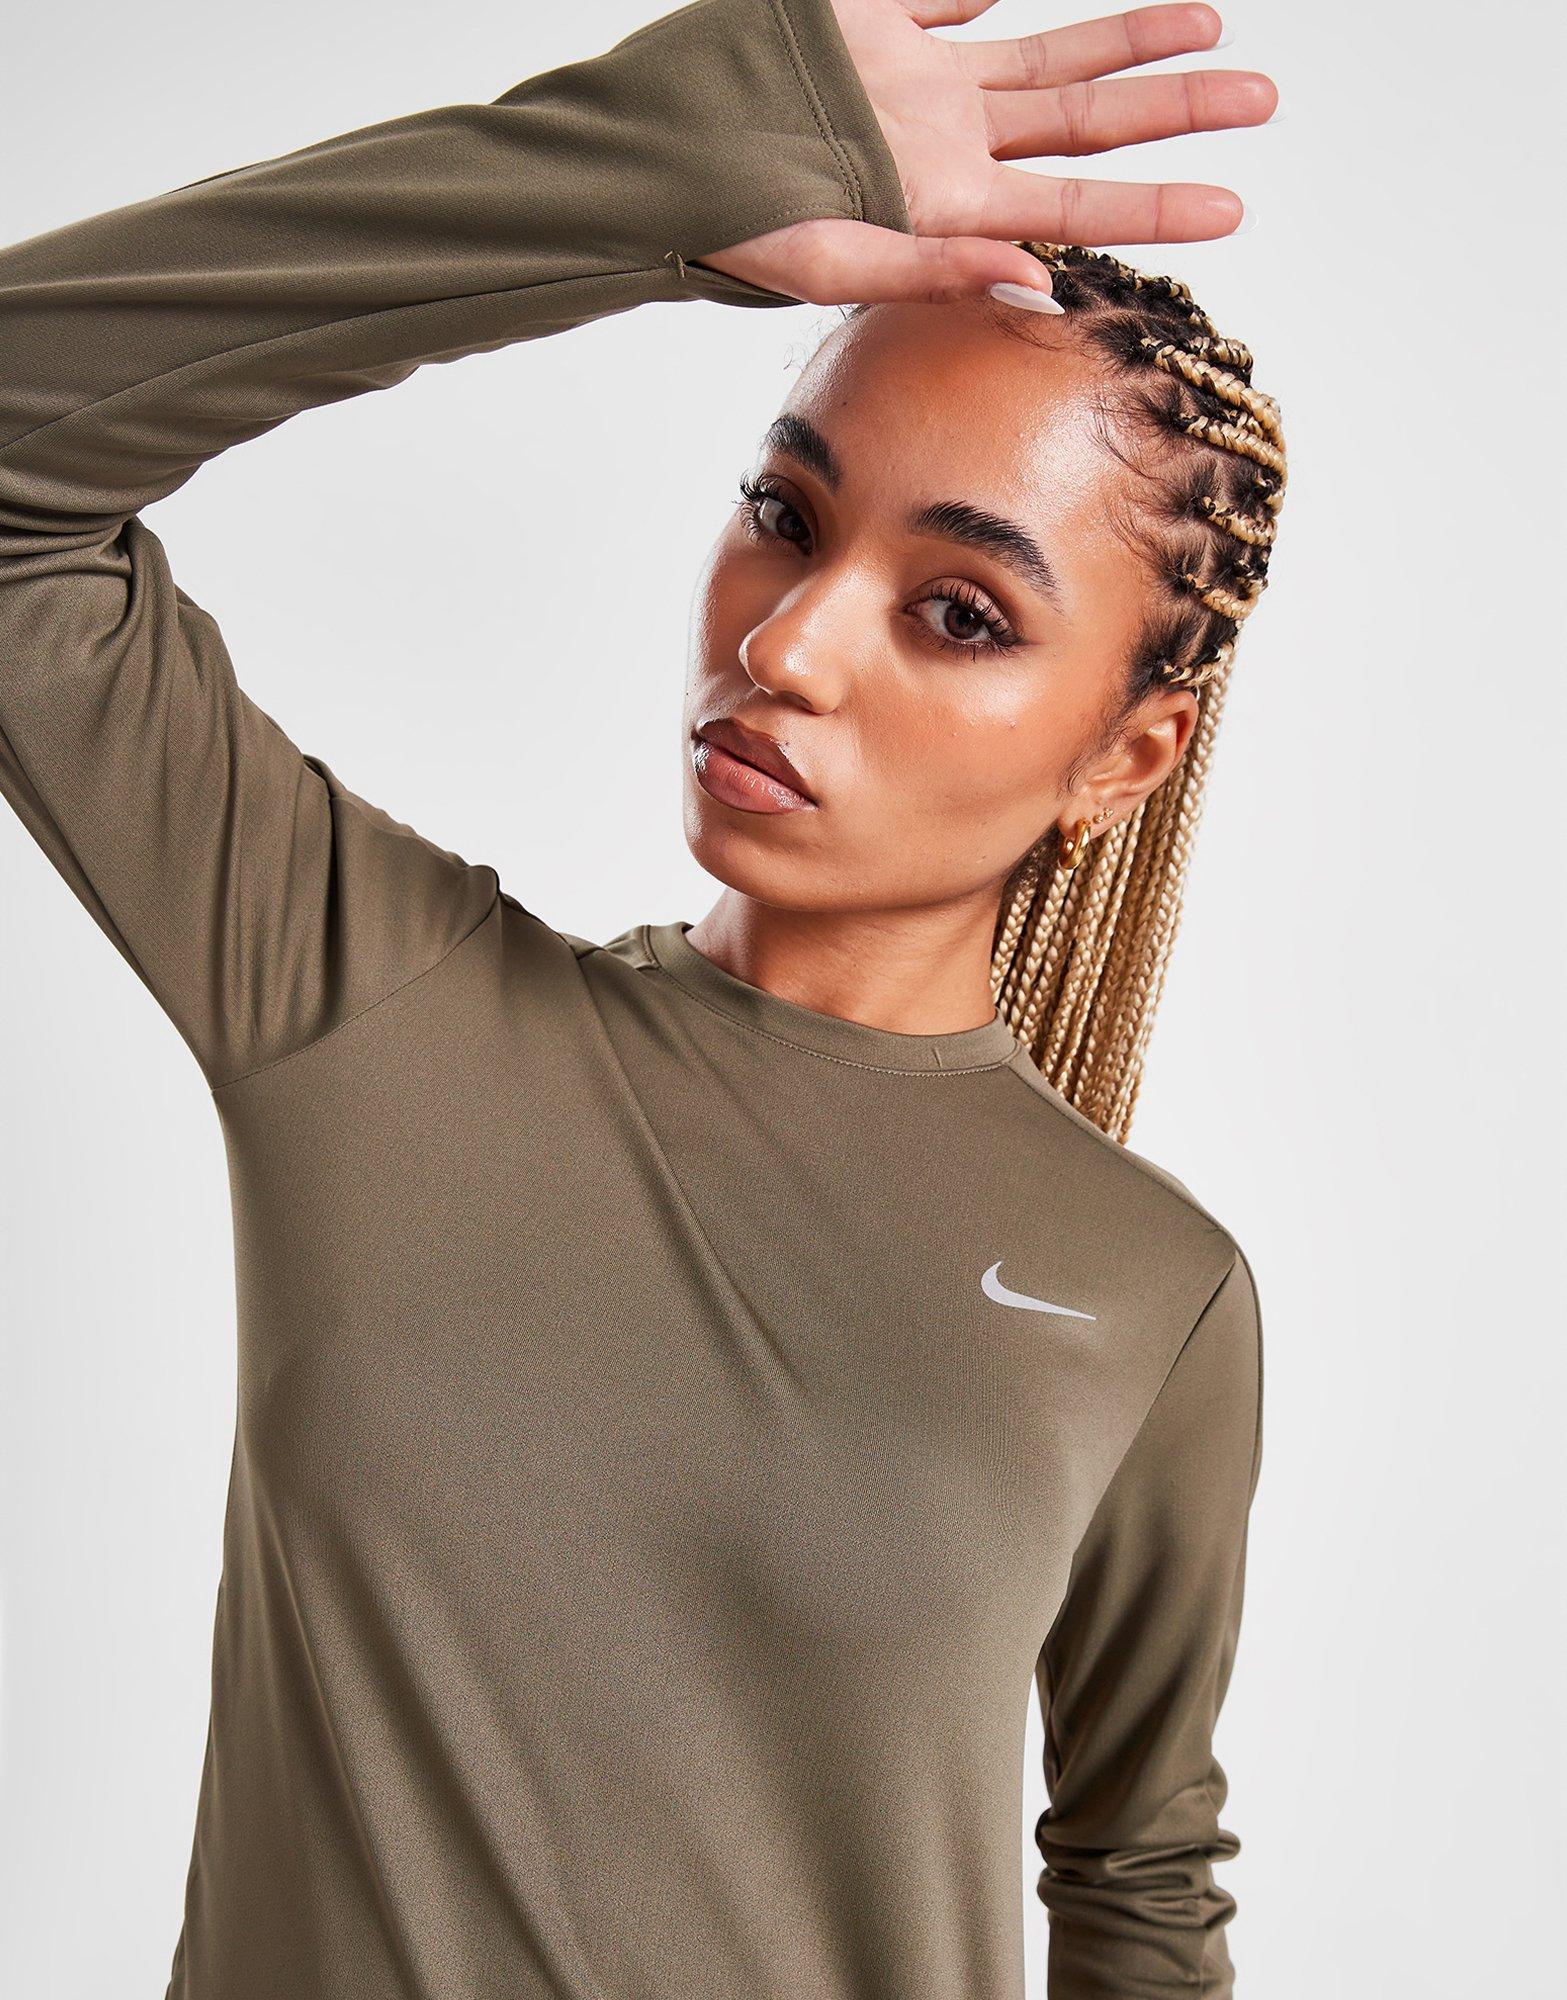 nike pacer crew top